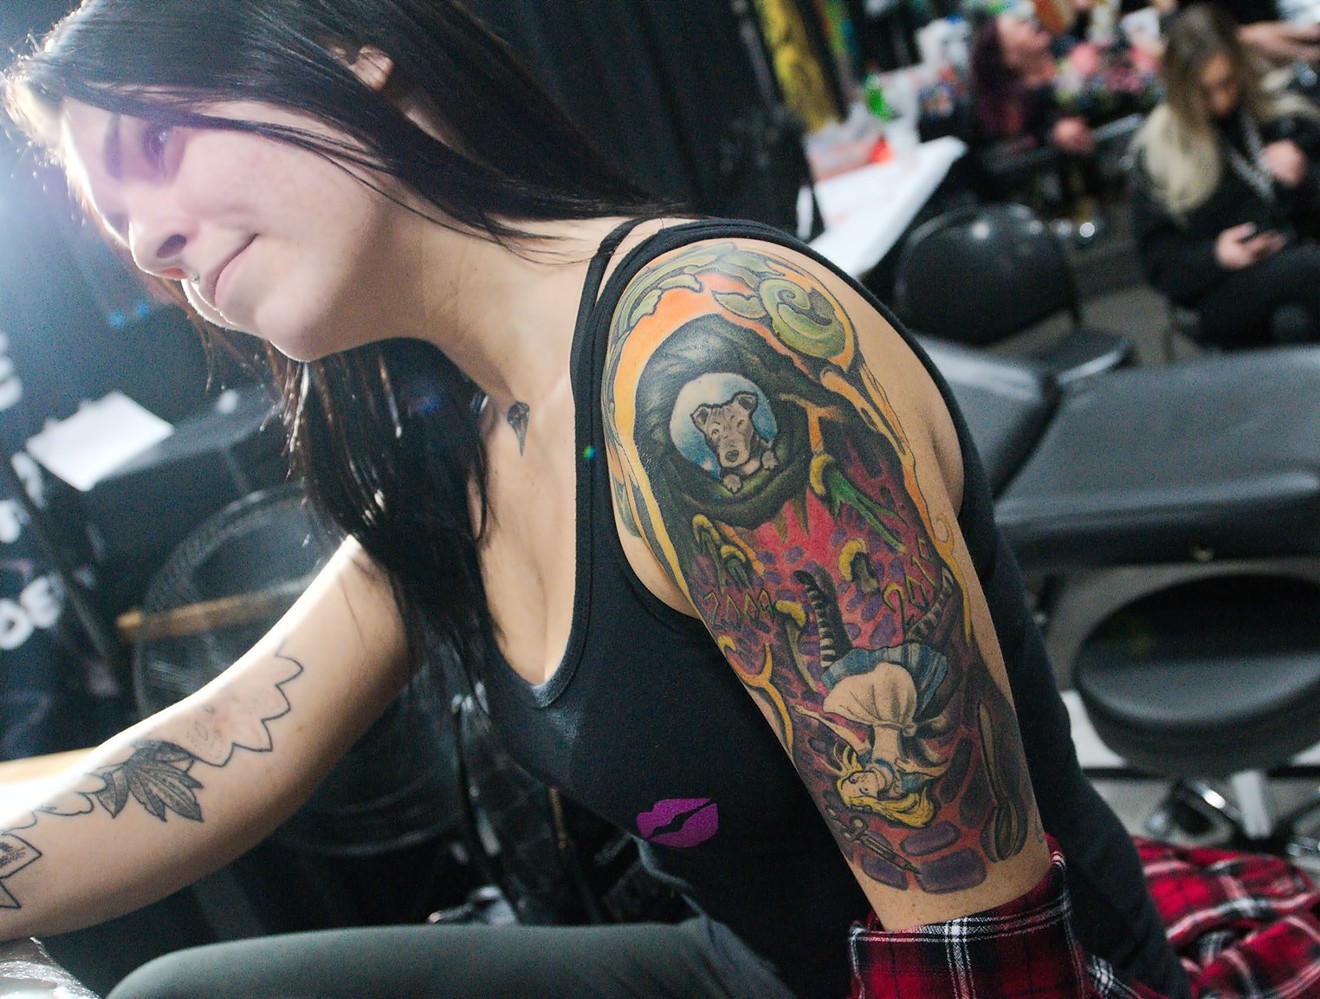 An impressive sleeve inspired by "Alice in Wonderland" at the Body Art Expo in 2020.